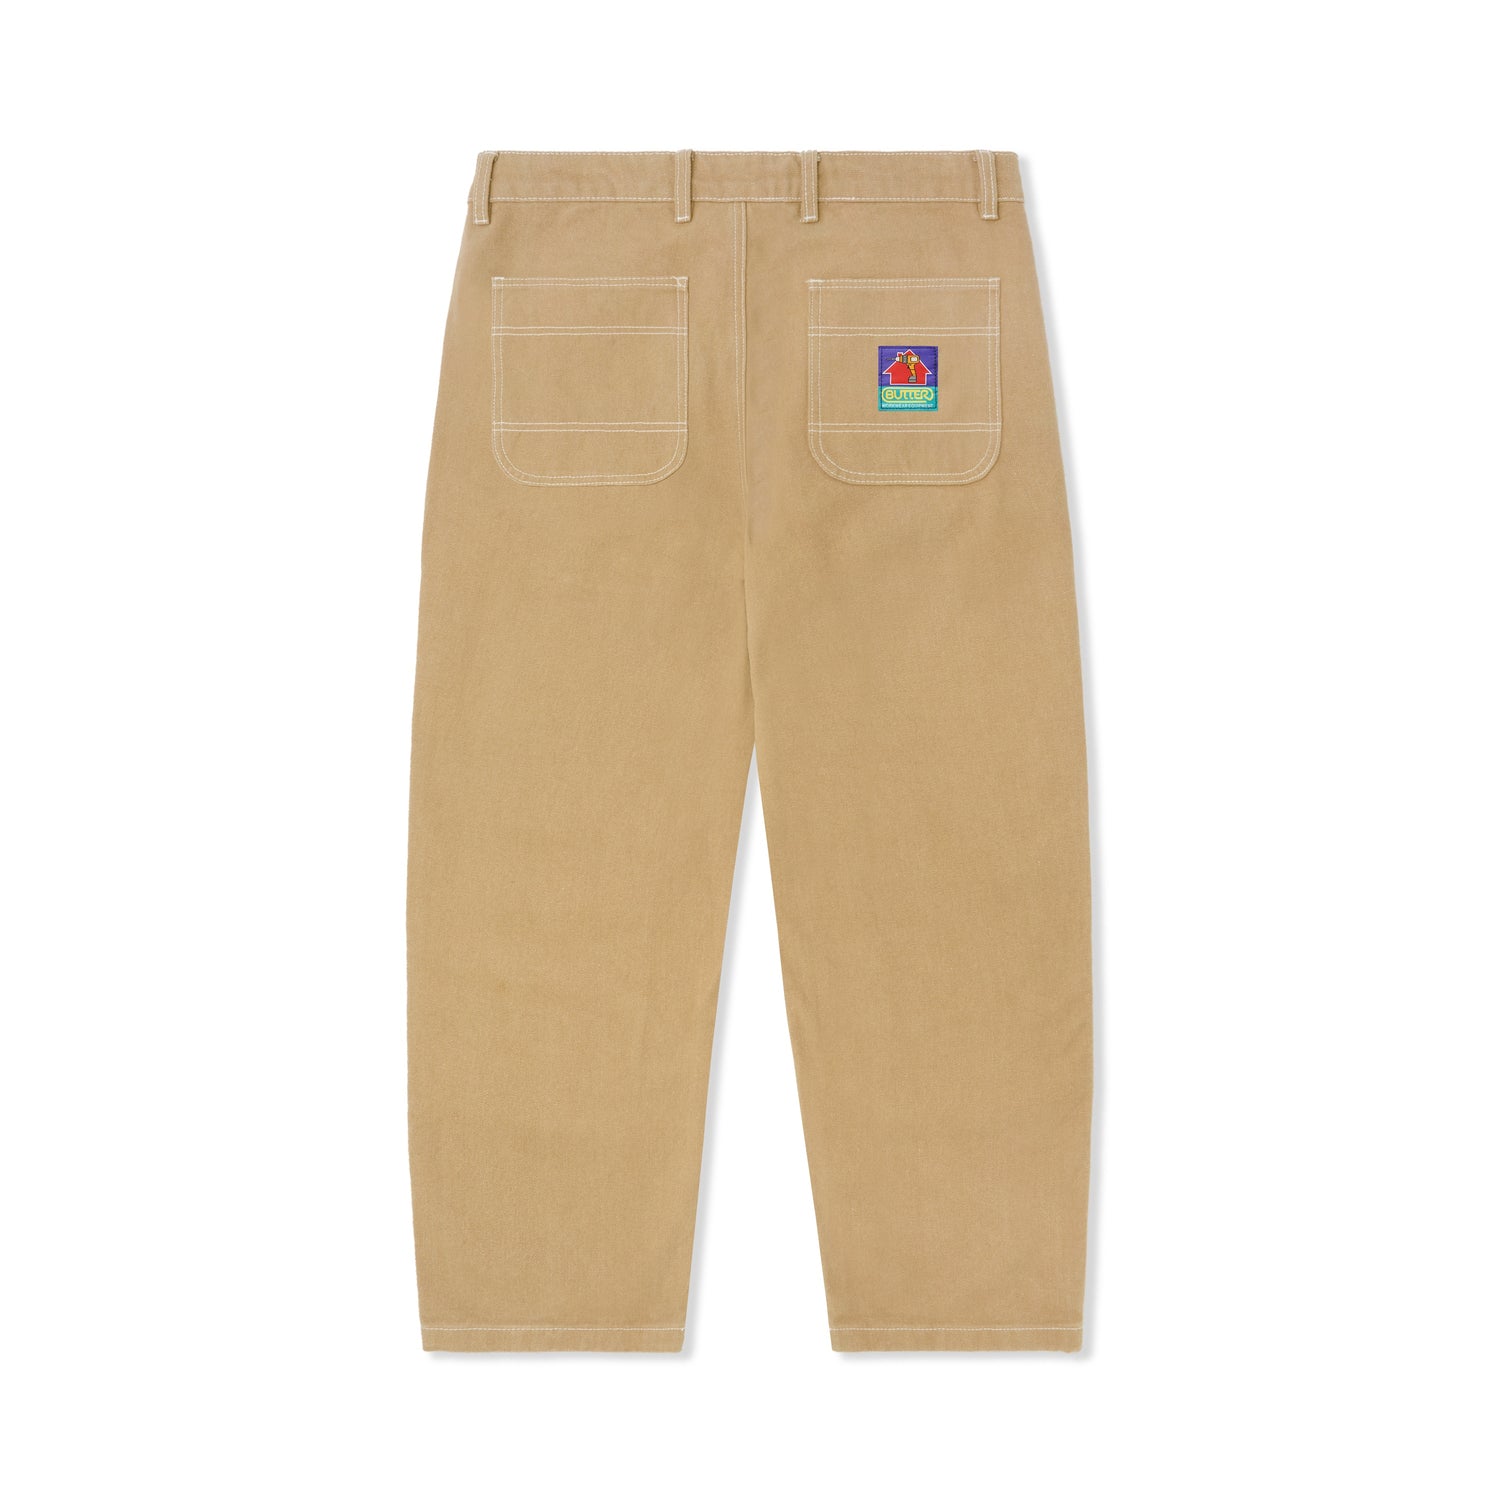 Work Double Knee Pants, Washed Brown